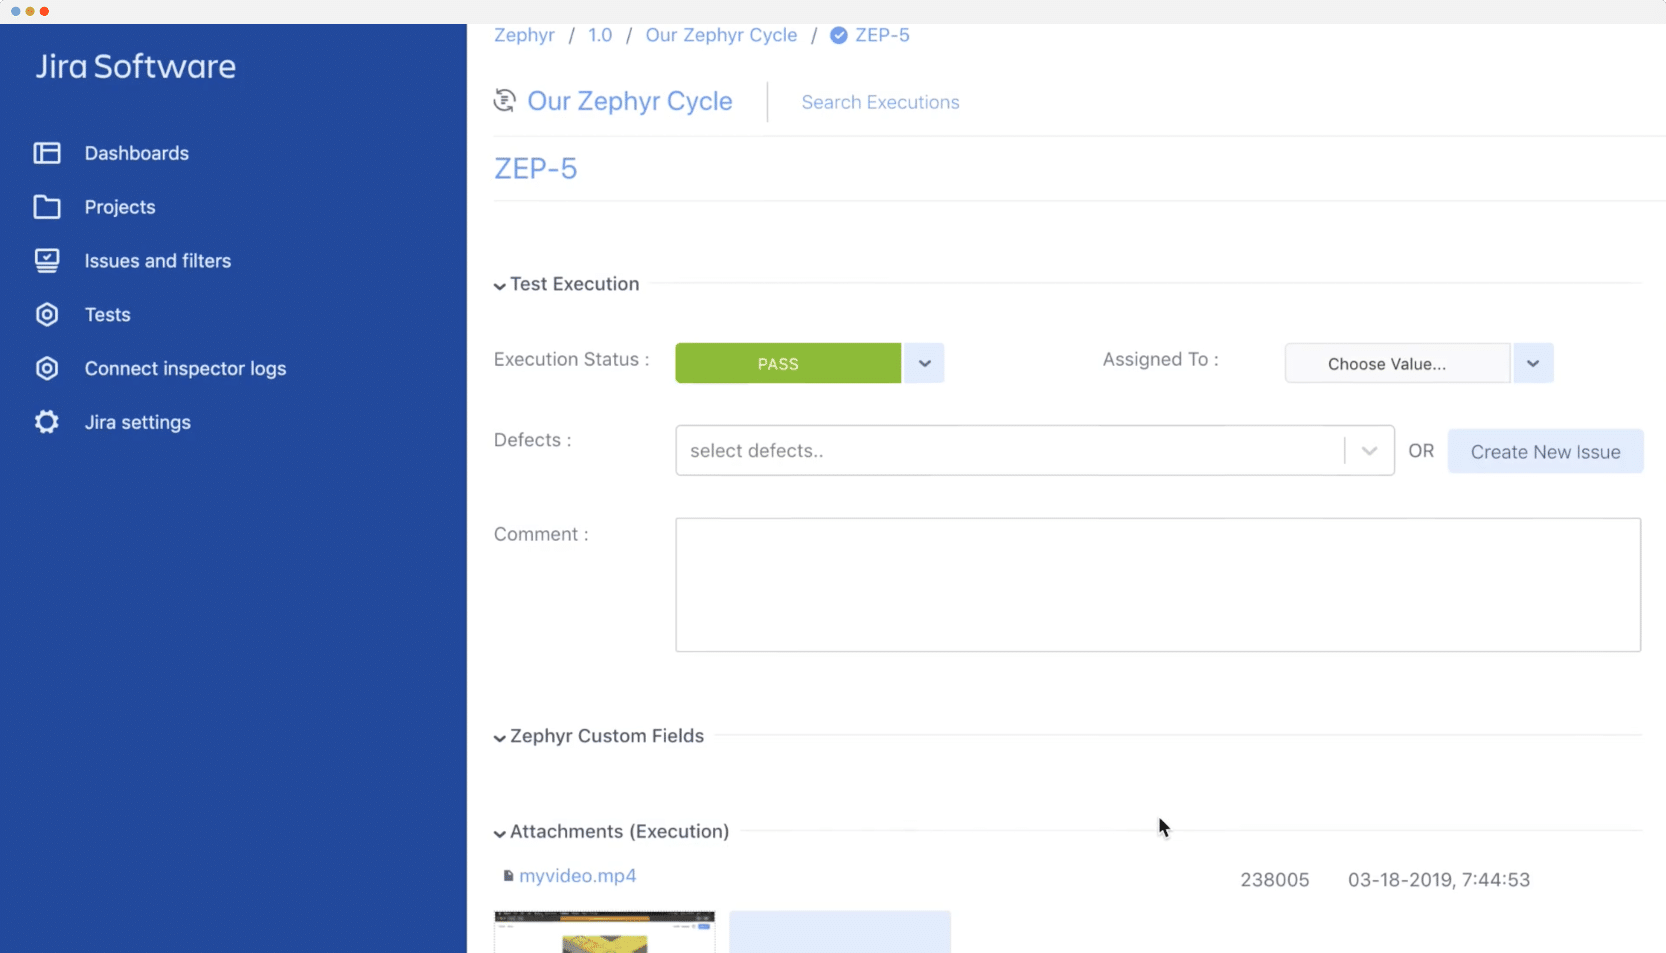 Zephyr's interface differs from the Atlassian product look